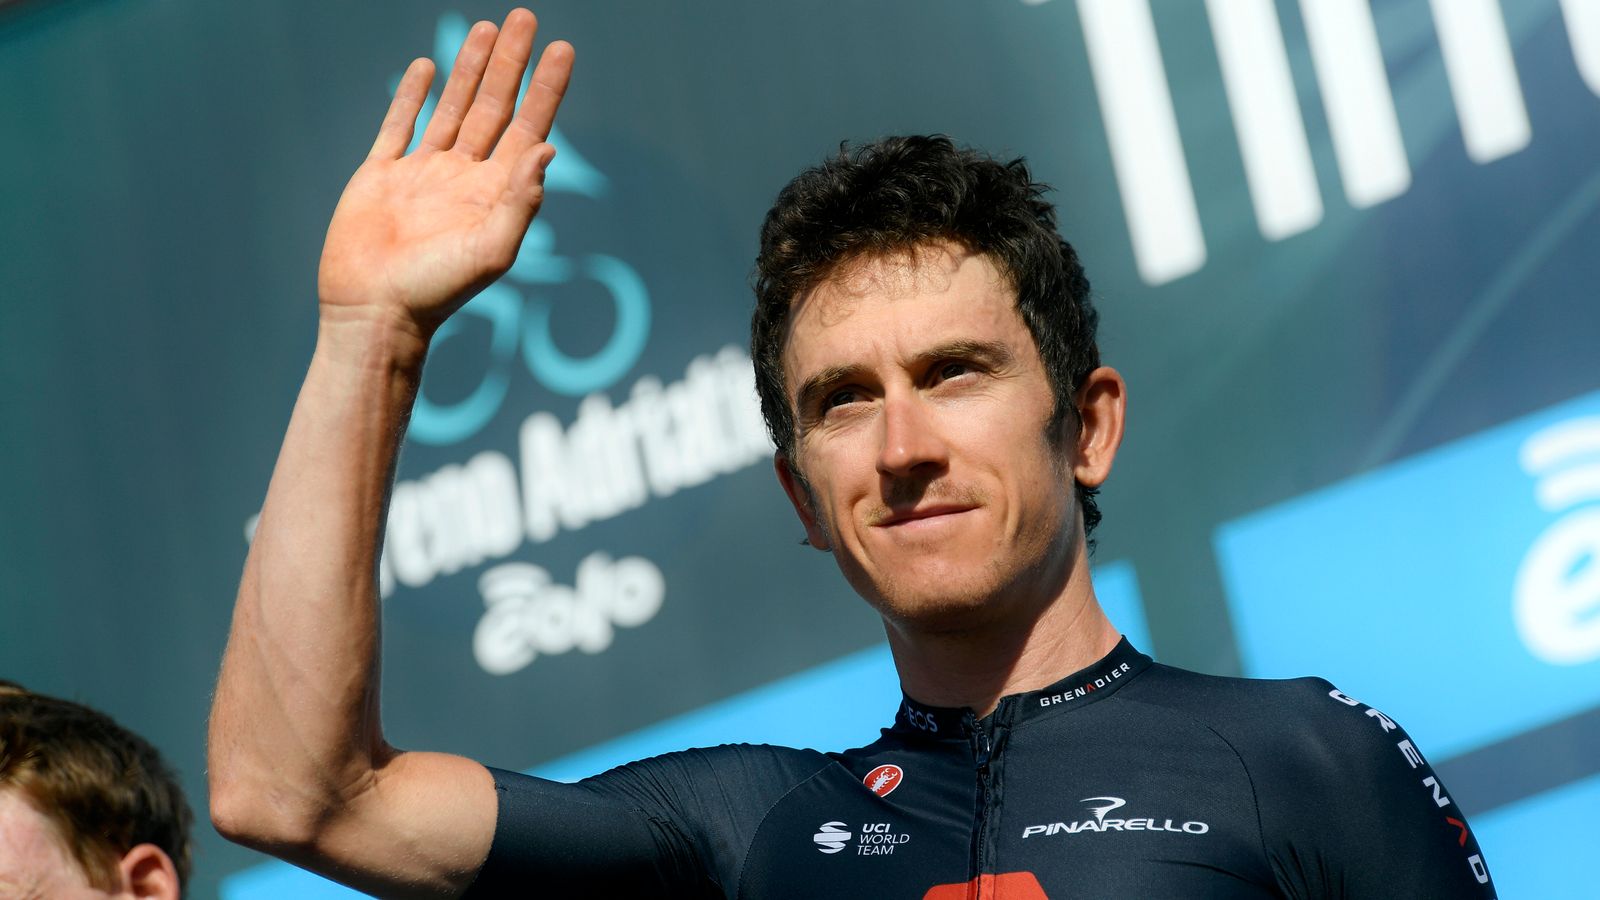 Geraint Thomas to lead Ineos Grenadiers at Tour de France amid contract